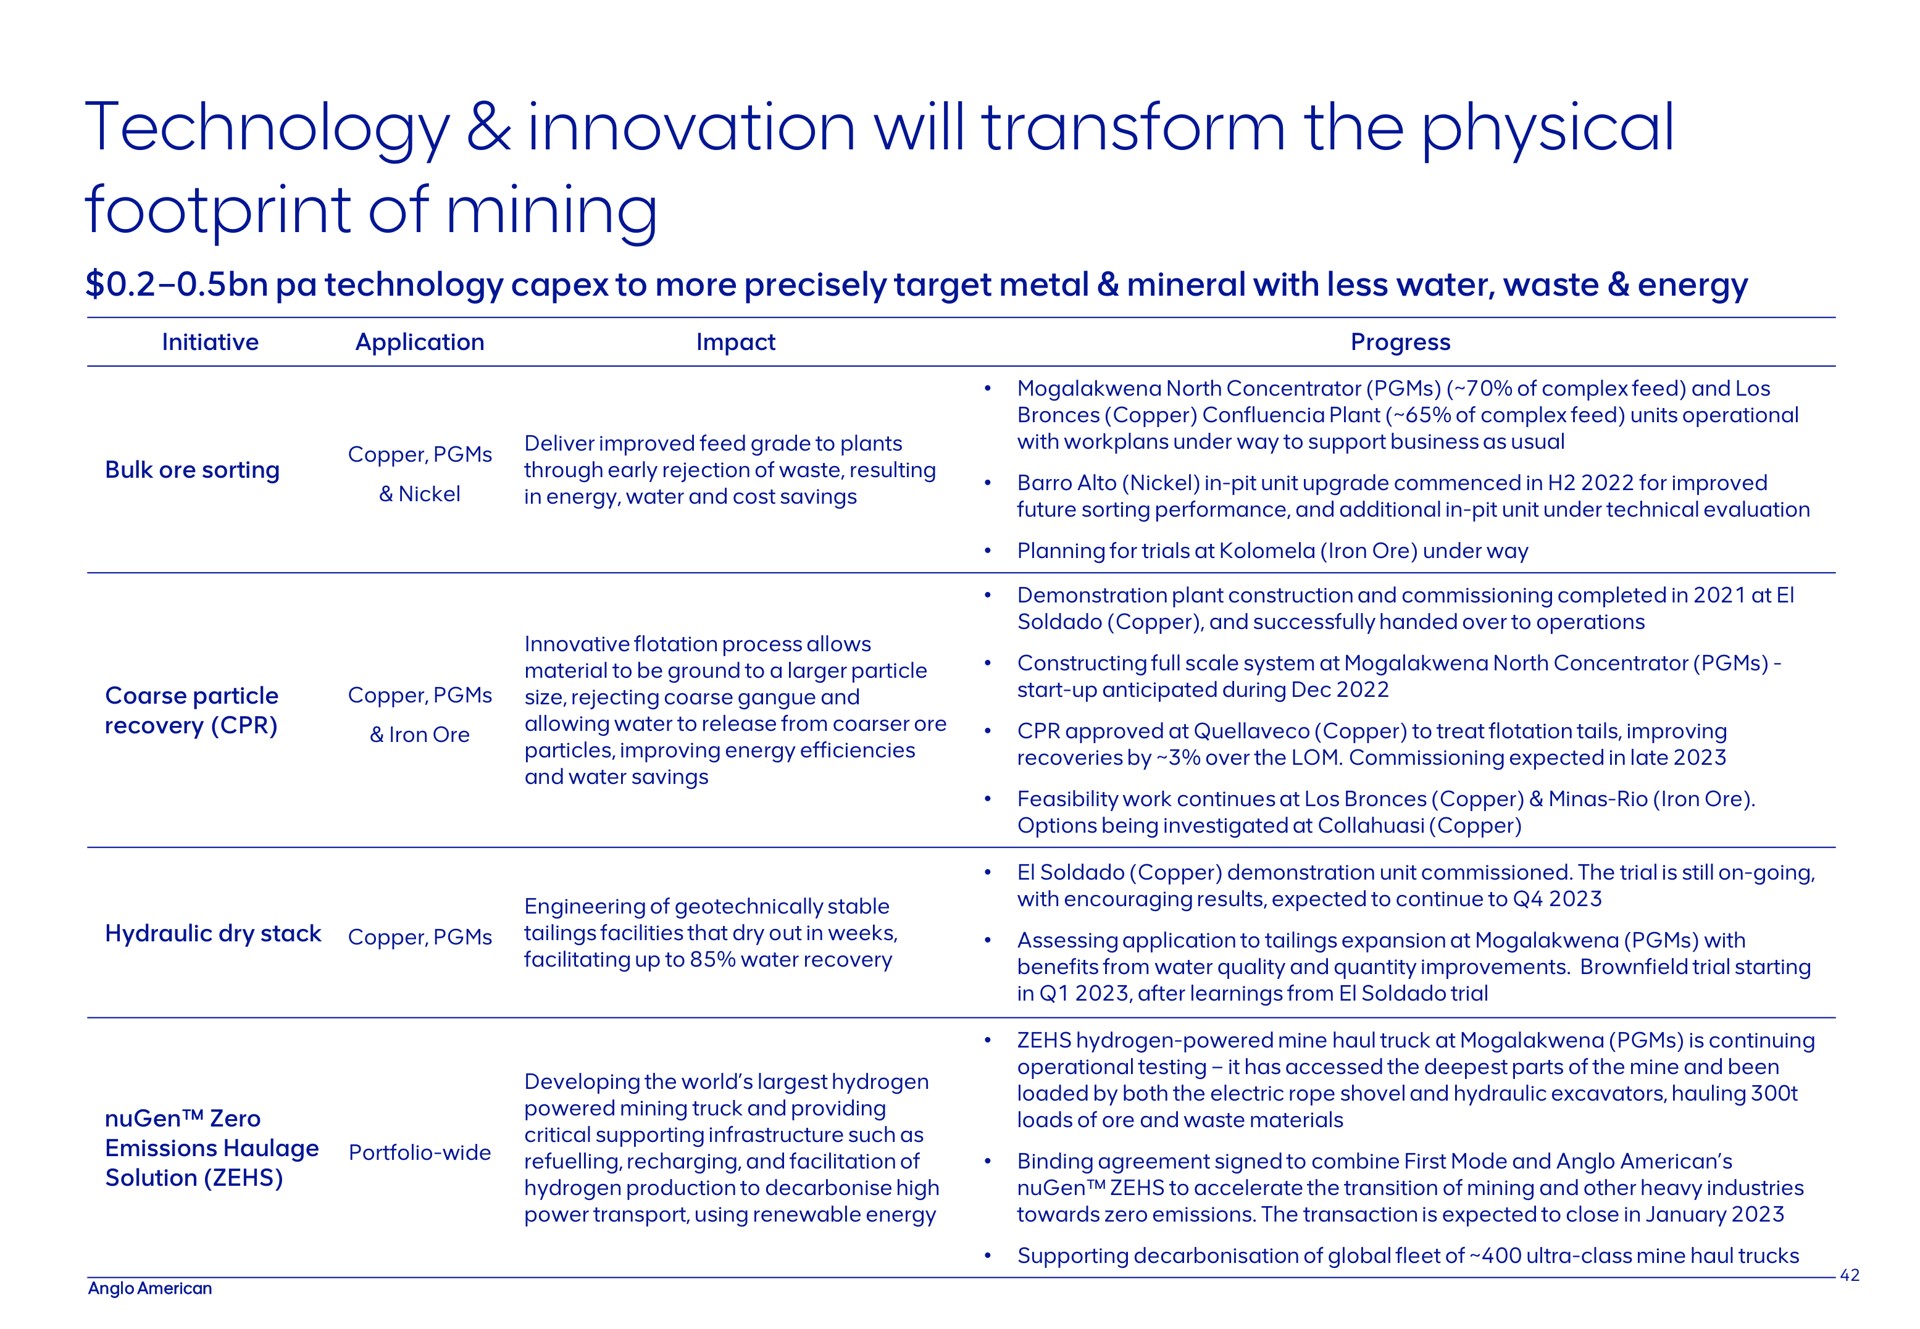 technology innovation will transform the physical footprint of mining | AngloAmerican